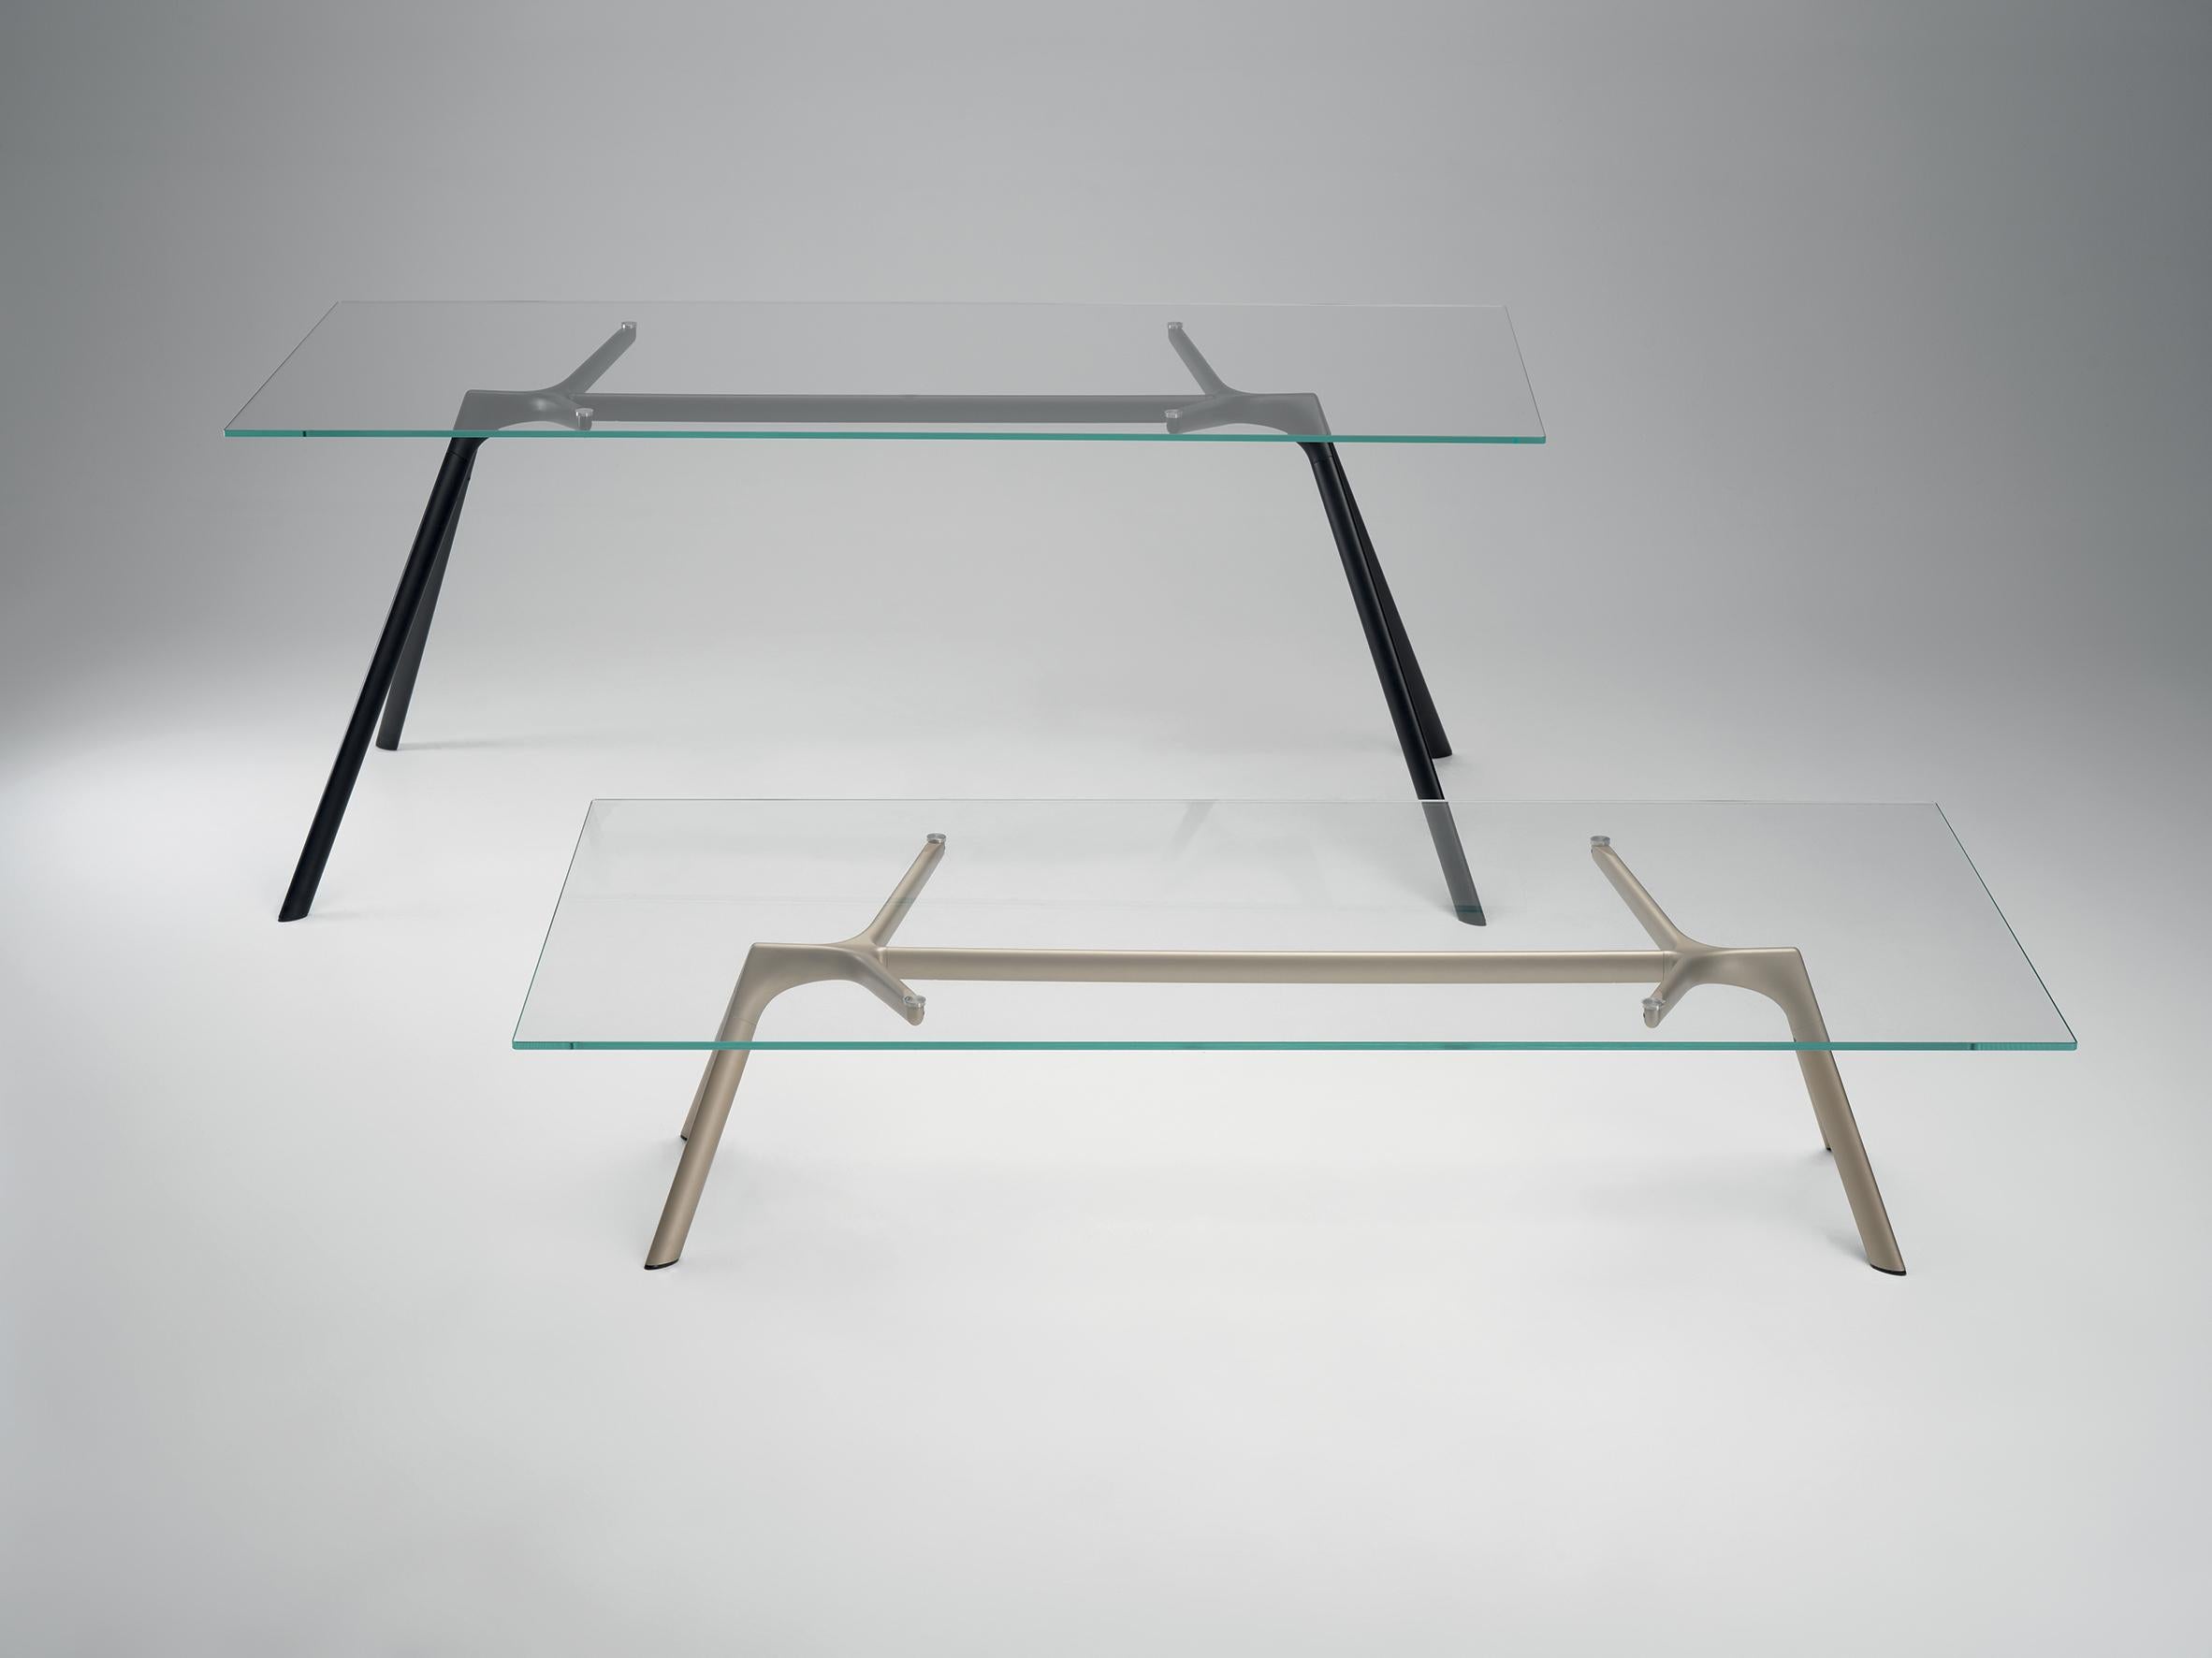 Alias Medium Dry XS 45B Table in Glass Top with Anodised Gold Metallic Lacquered Aluminium Frame by Alberto Meda

Low table with structure made of lacquered aluminium elements. Top in extra light tempered glass, thickness 10 mm.

Born in Lenno